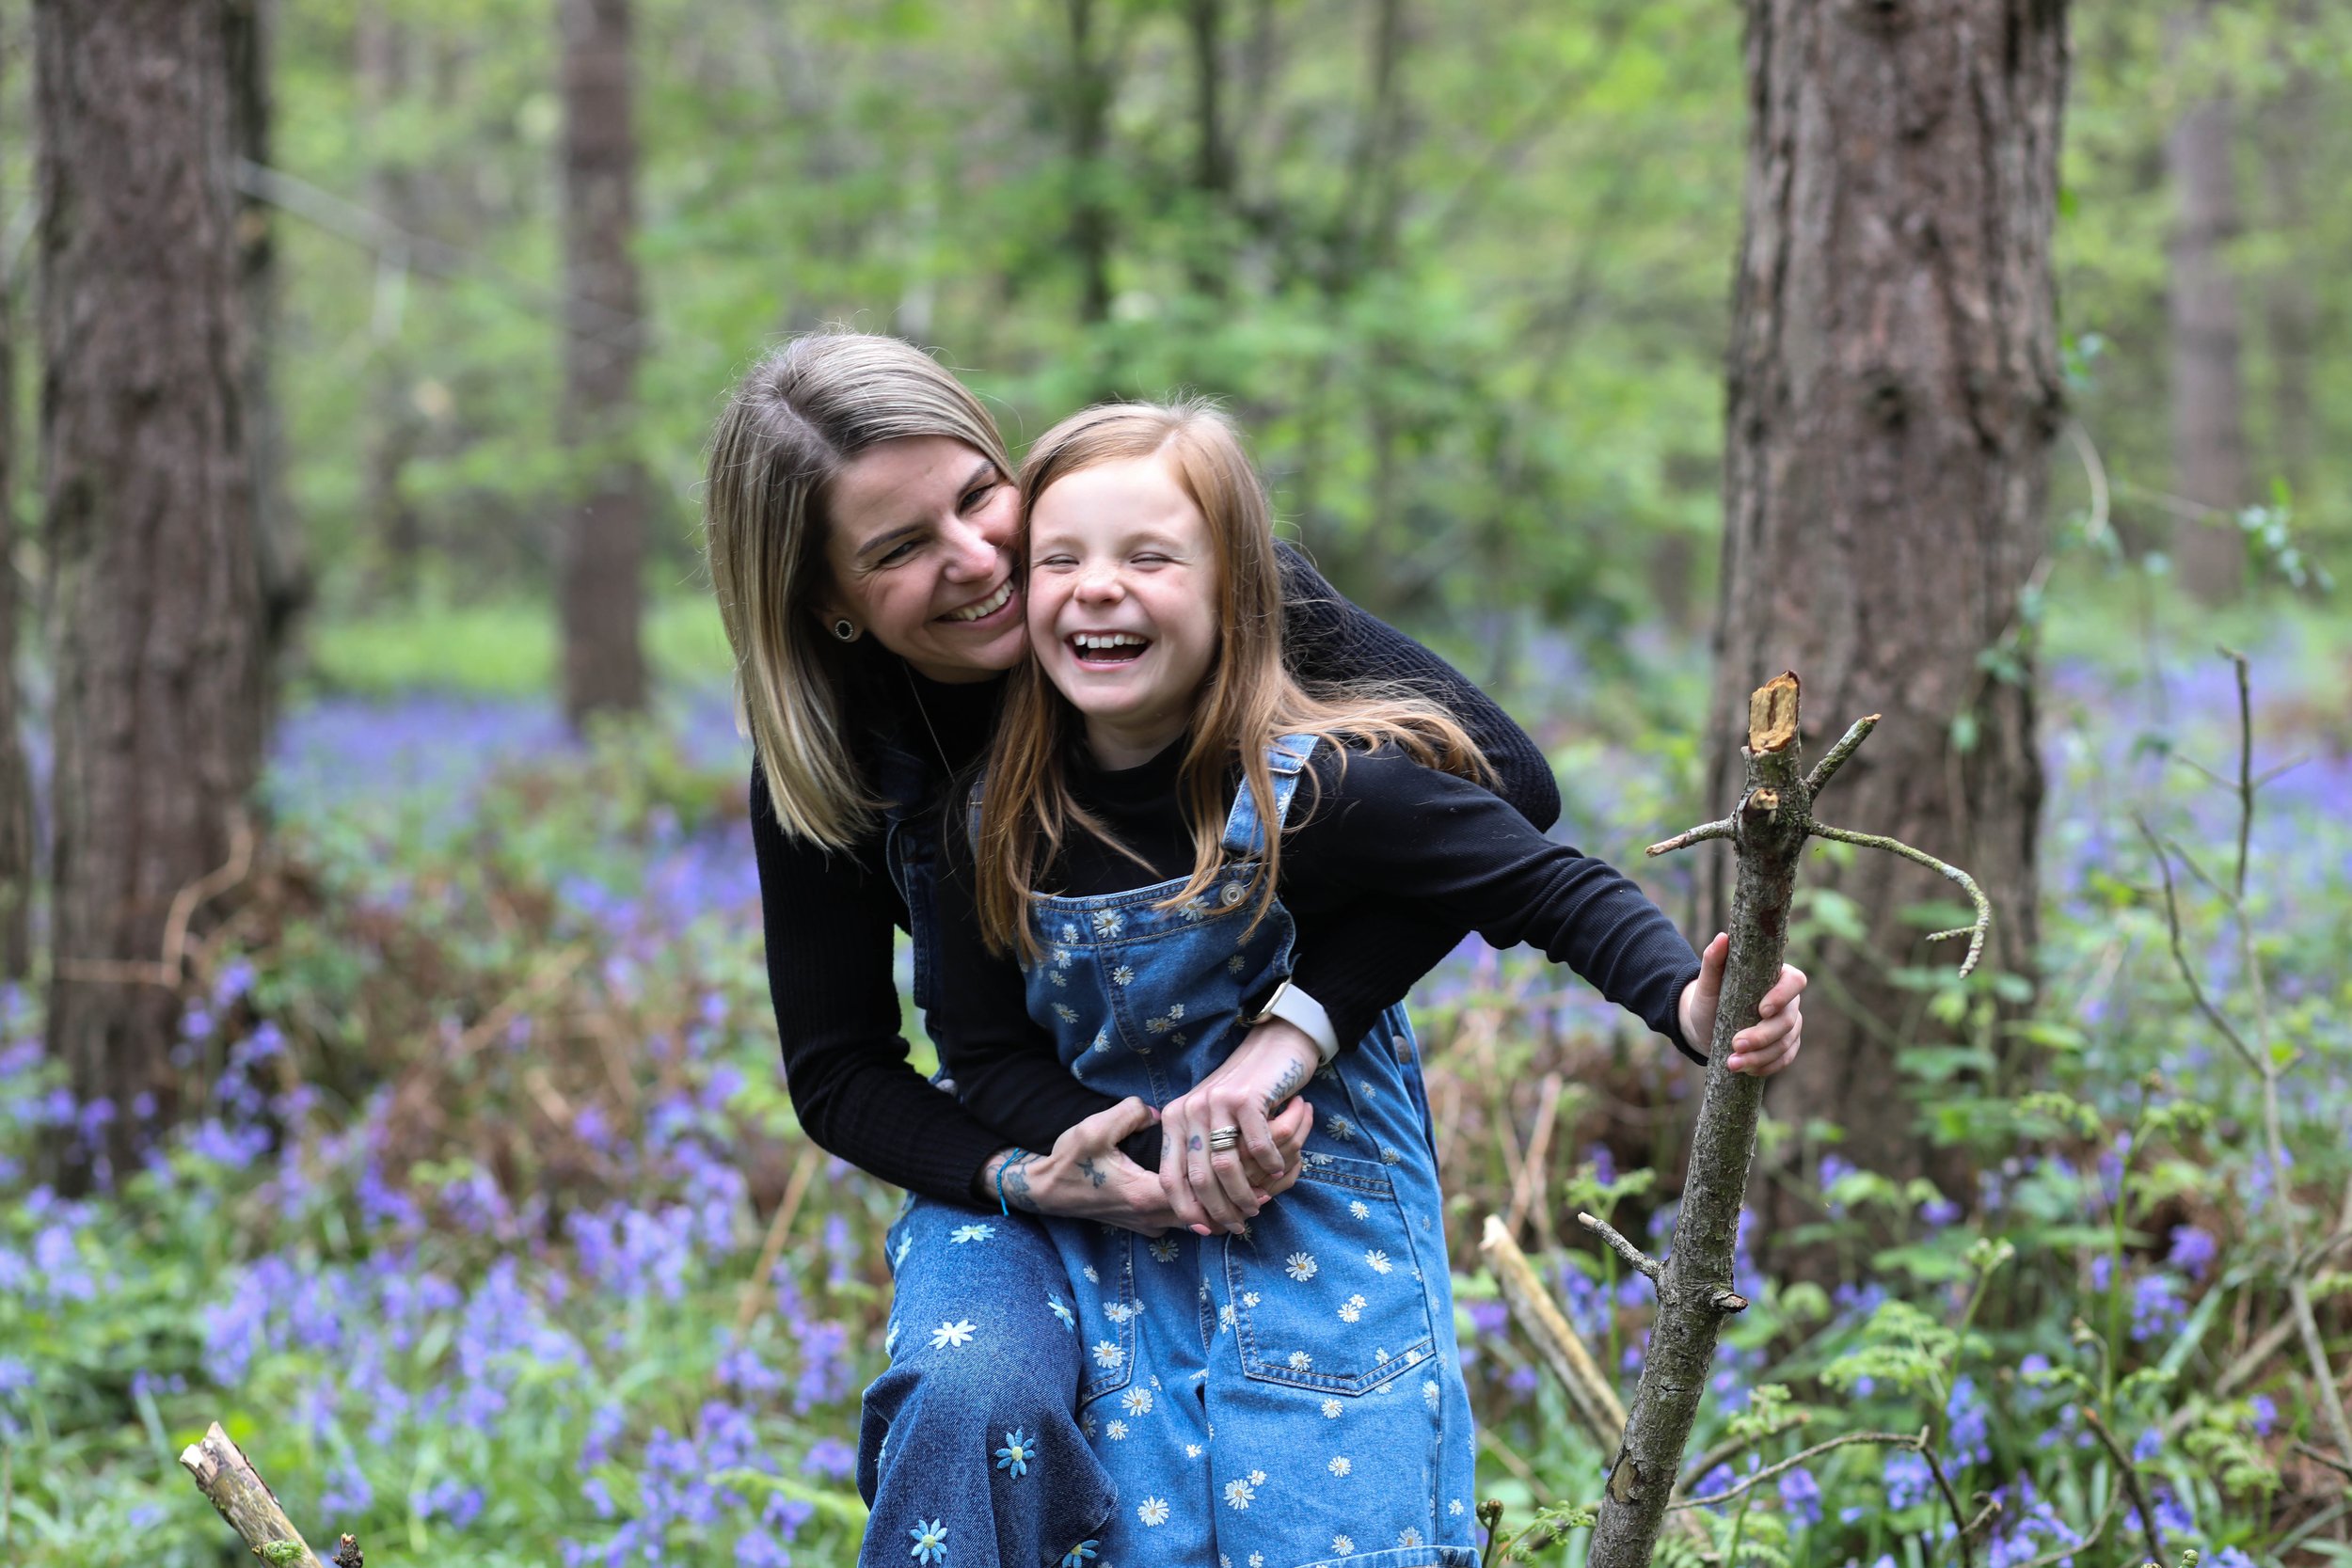 MUM AND DAUGHTER PHOTO SHOOT IN THE BLUEBELLS | BERKSHIRE PORTRAIT SHOOTS29 choice .JPG